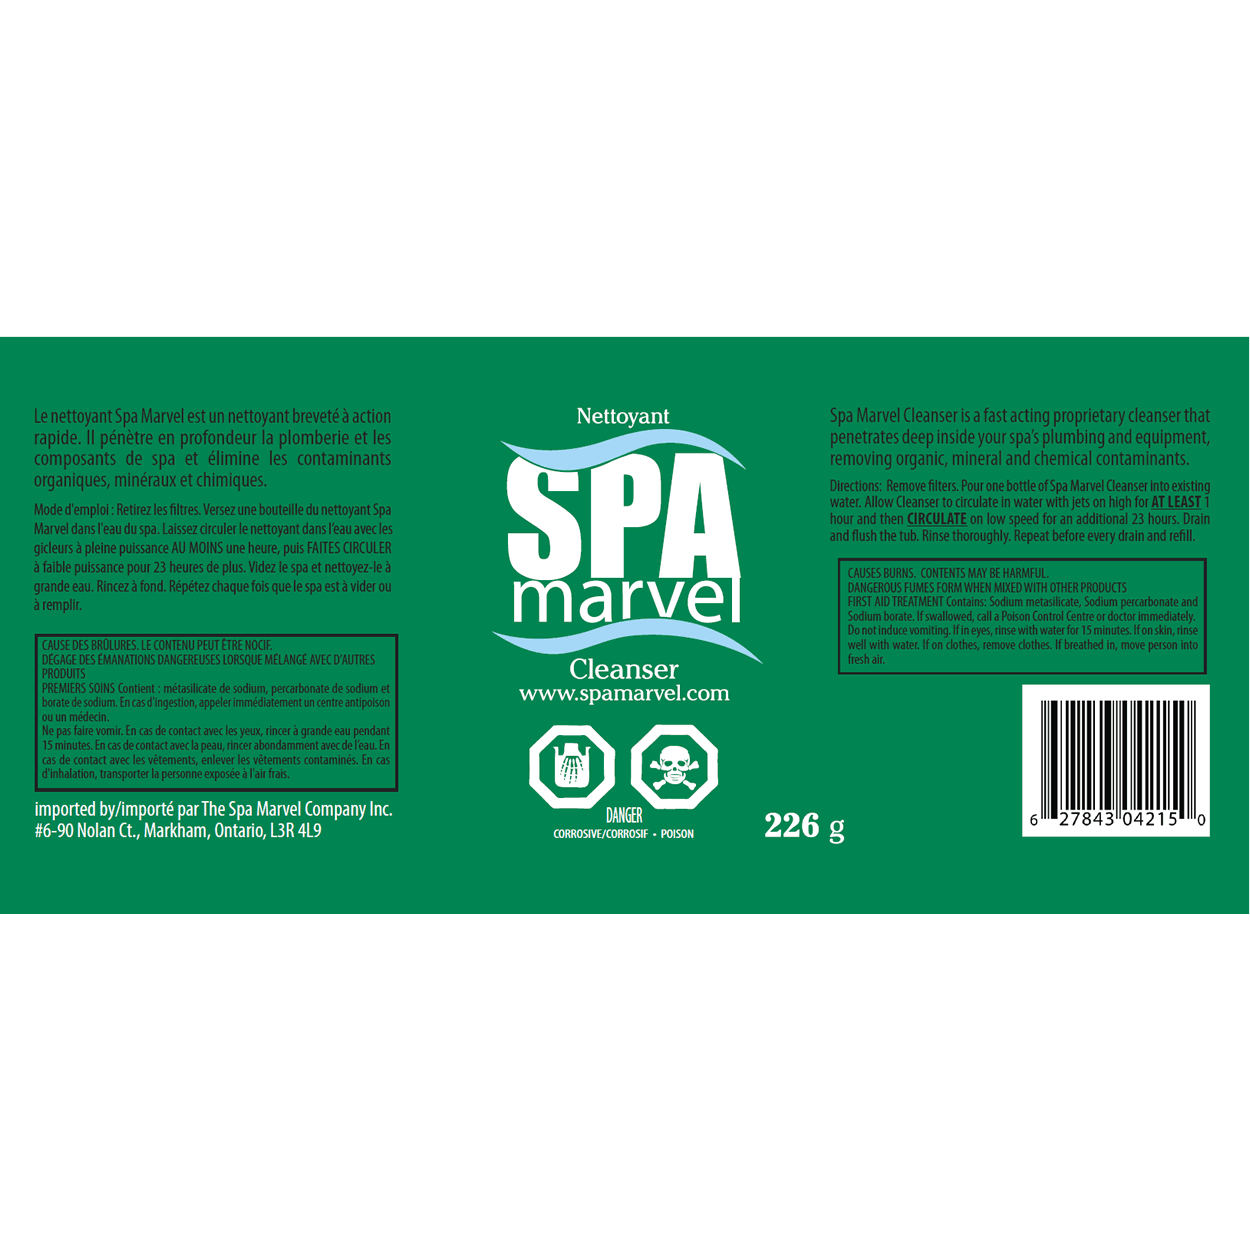 https://www.spasuppliesdepot.com/wp-content/uploads/2019/08/Spa-Marvel-Cleanser-Label-Instructions-sq.gif